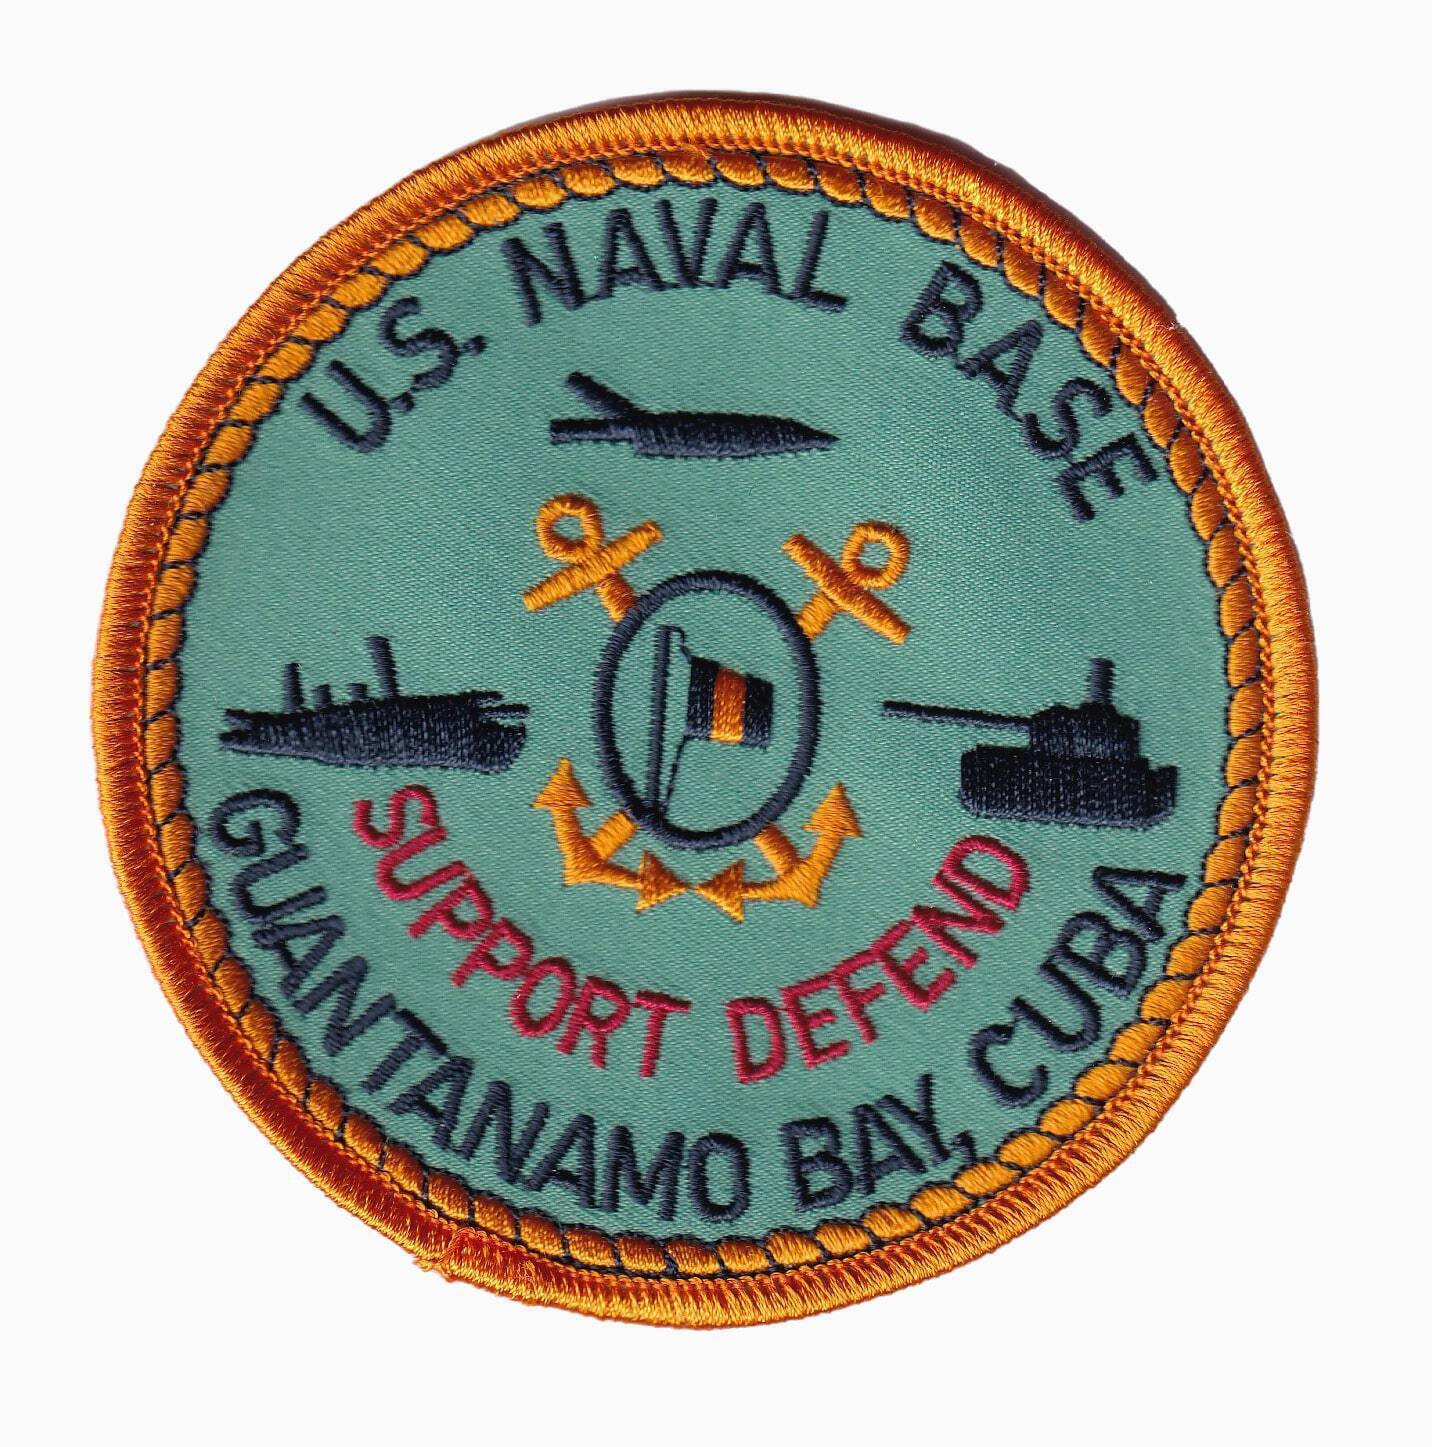 US Naval Base Guantanamo Bay Patch - With Hook and Loop, 4\